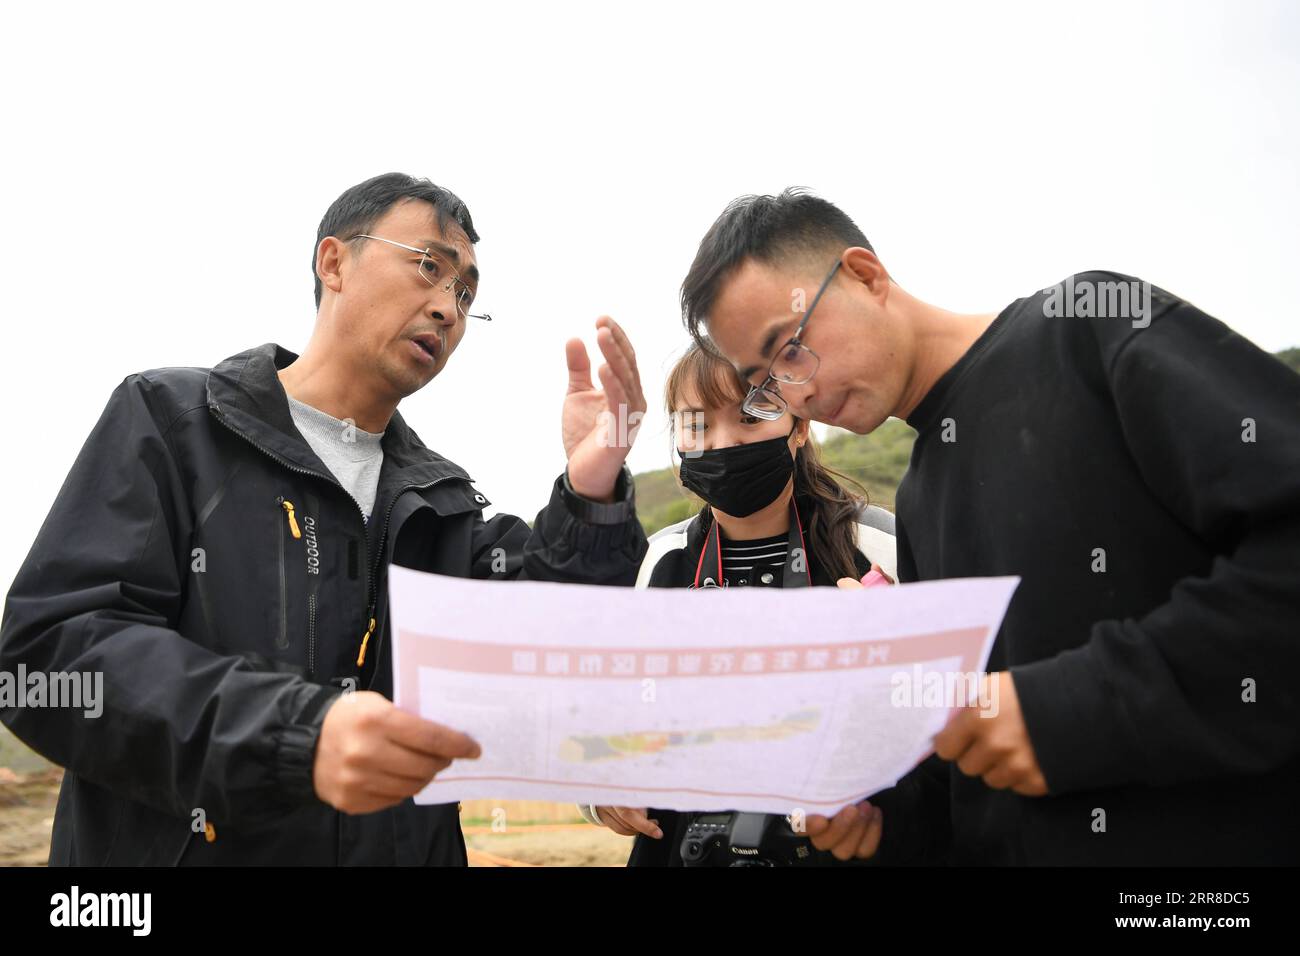 210503 -- TIANSHUI, May 3, 2021 -- Zhang Shuhao 1st L discusses the construction plan for a production base with his colleagues in Mudan Township, Tianshui City of northwest China s Gansu Province, on April 27, 2021. Zhang Shuhao, 42, quit his well-paid job three years ago to start an agriculture company with a few partners sharing the same vision at a mountainous village in Mudan Township, Tianshui City. In three years, Xinghuarong, Zhang s company, contracted 6,200 mu about 413 hectares of idle arable lands, where terraced fields, greenhouses, and a reservoir have been built to grow diverse Stock Photo